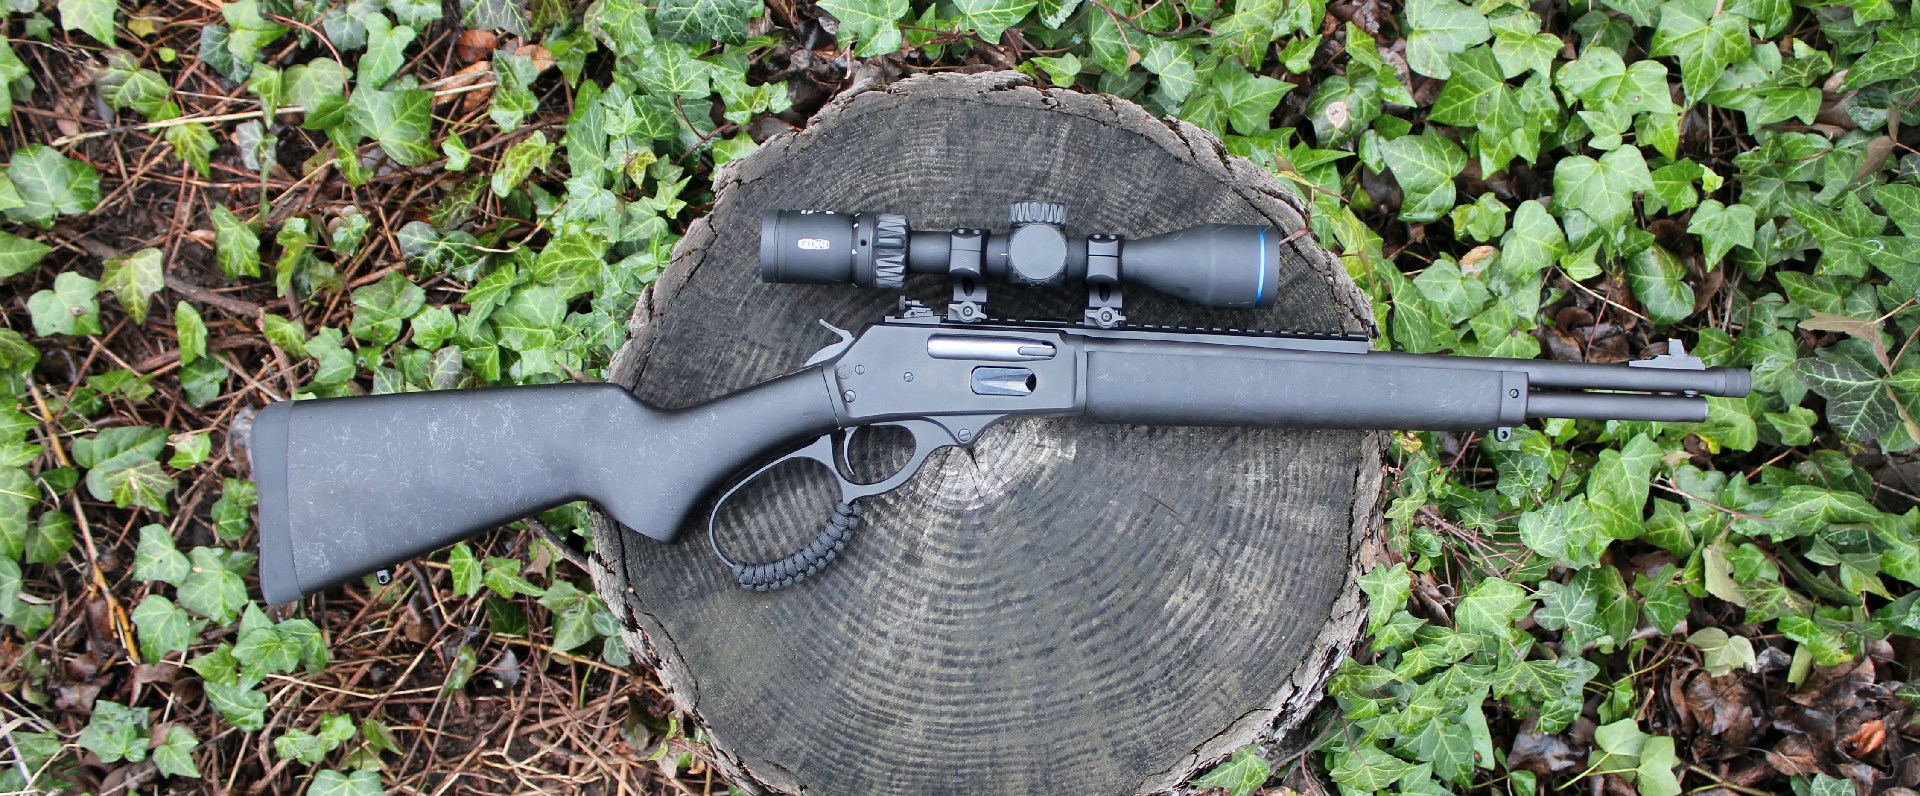 Rossi R95 Triple Black lever-action rifle right-side view shown with riflescope on stump log green ivy background black gun